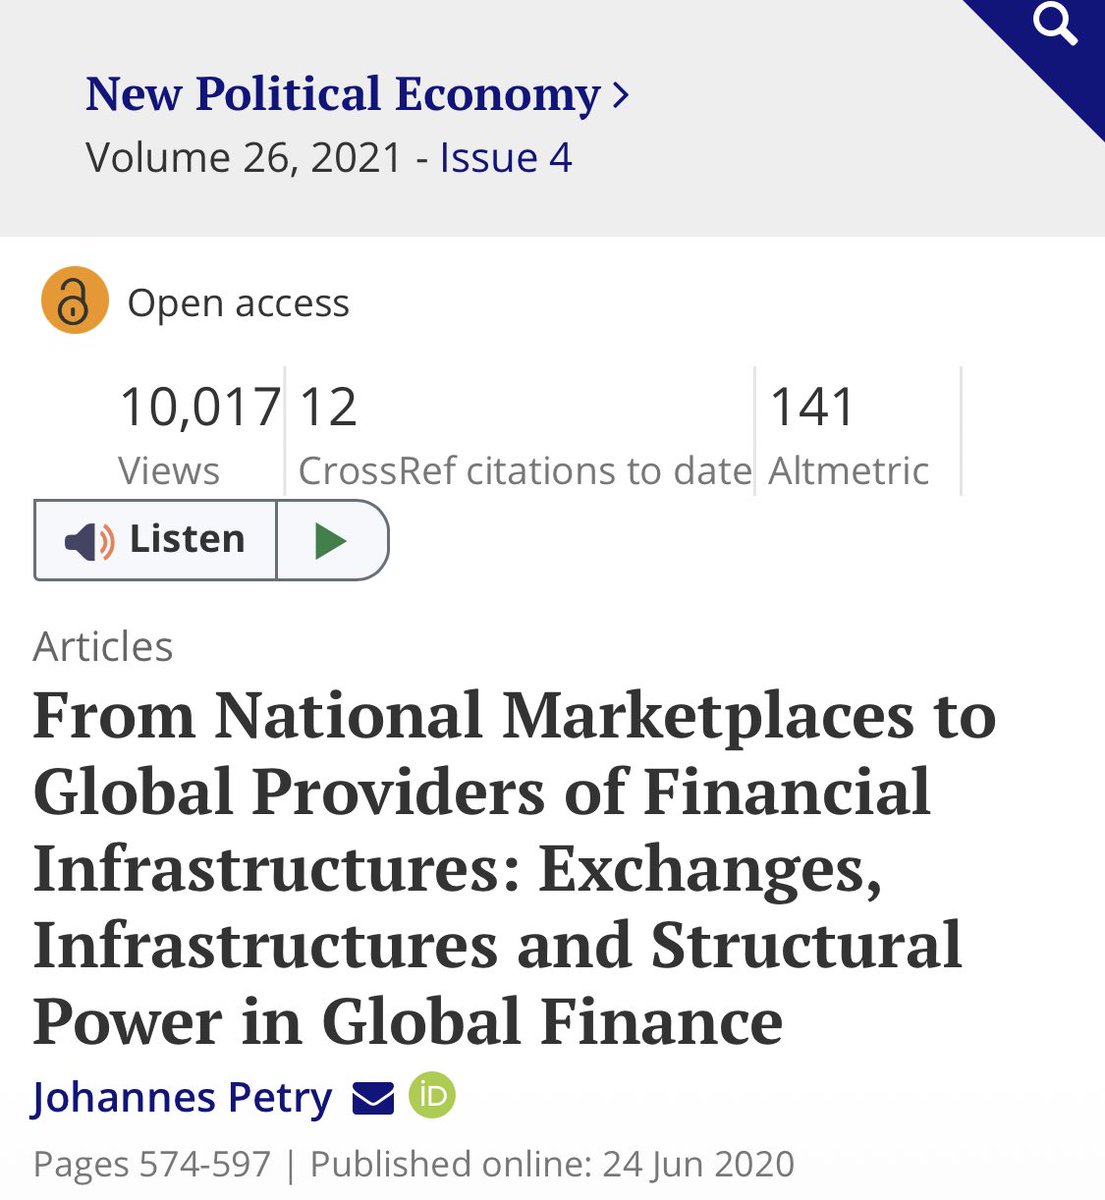 It seems as if people do care about exchanges after all 😊 My @NPEjournal article on their transformation into global infrastructure providers recently hit 10,000 views 🥳